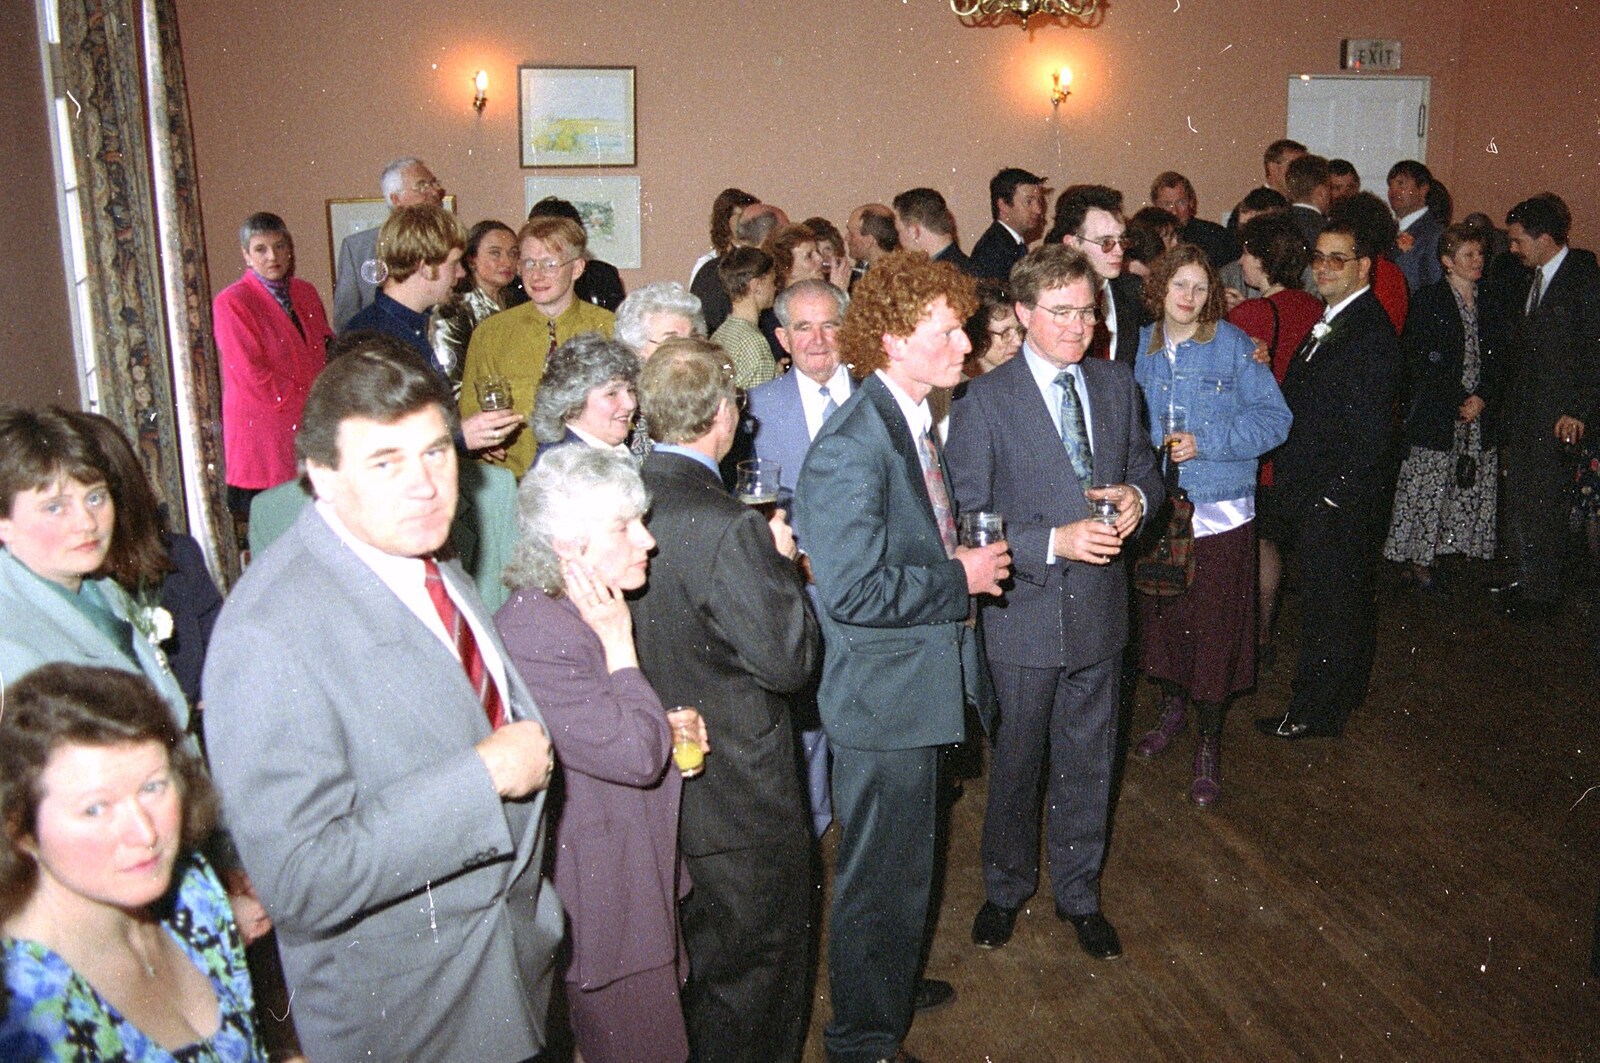 The pub gang, and other wedding guests from The Brome Swan at Graham and Pauline's Wedding, Gissing Hall, Norfolk - 28th April 1997